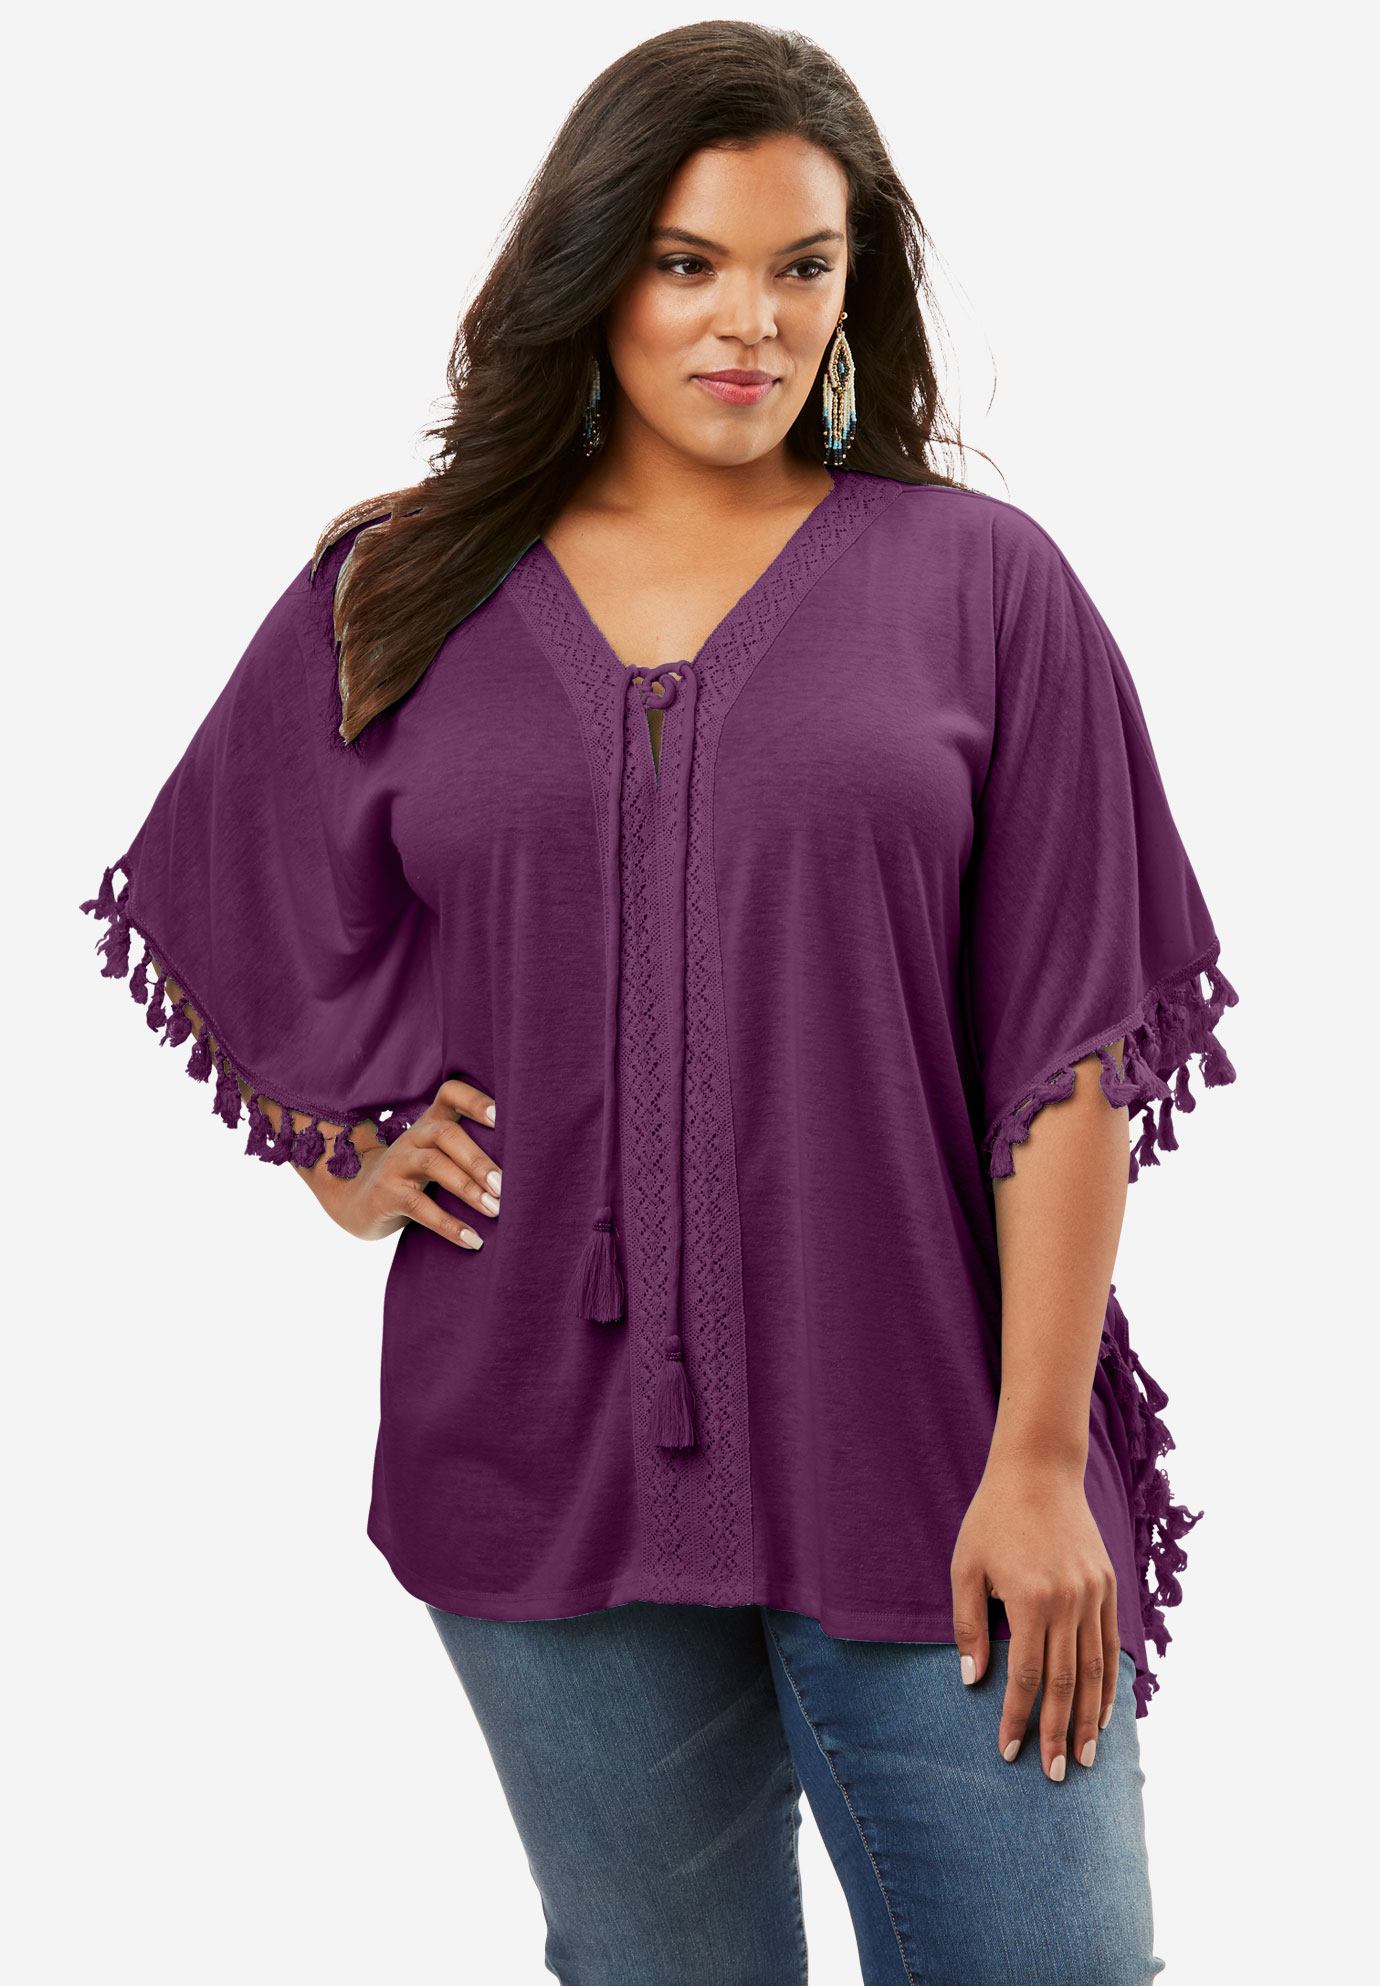 Lace-Up Poncho | Fullbeauty Outlet